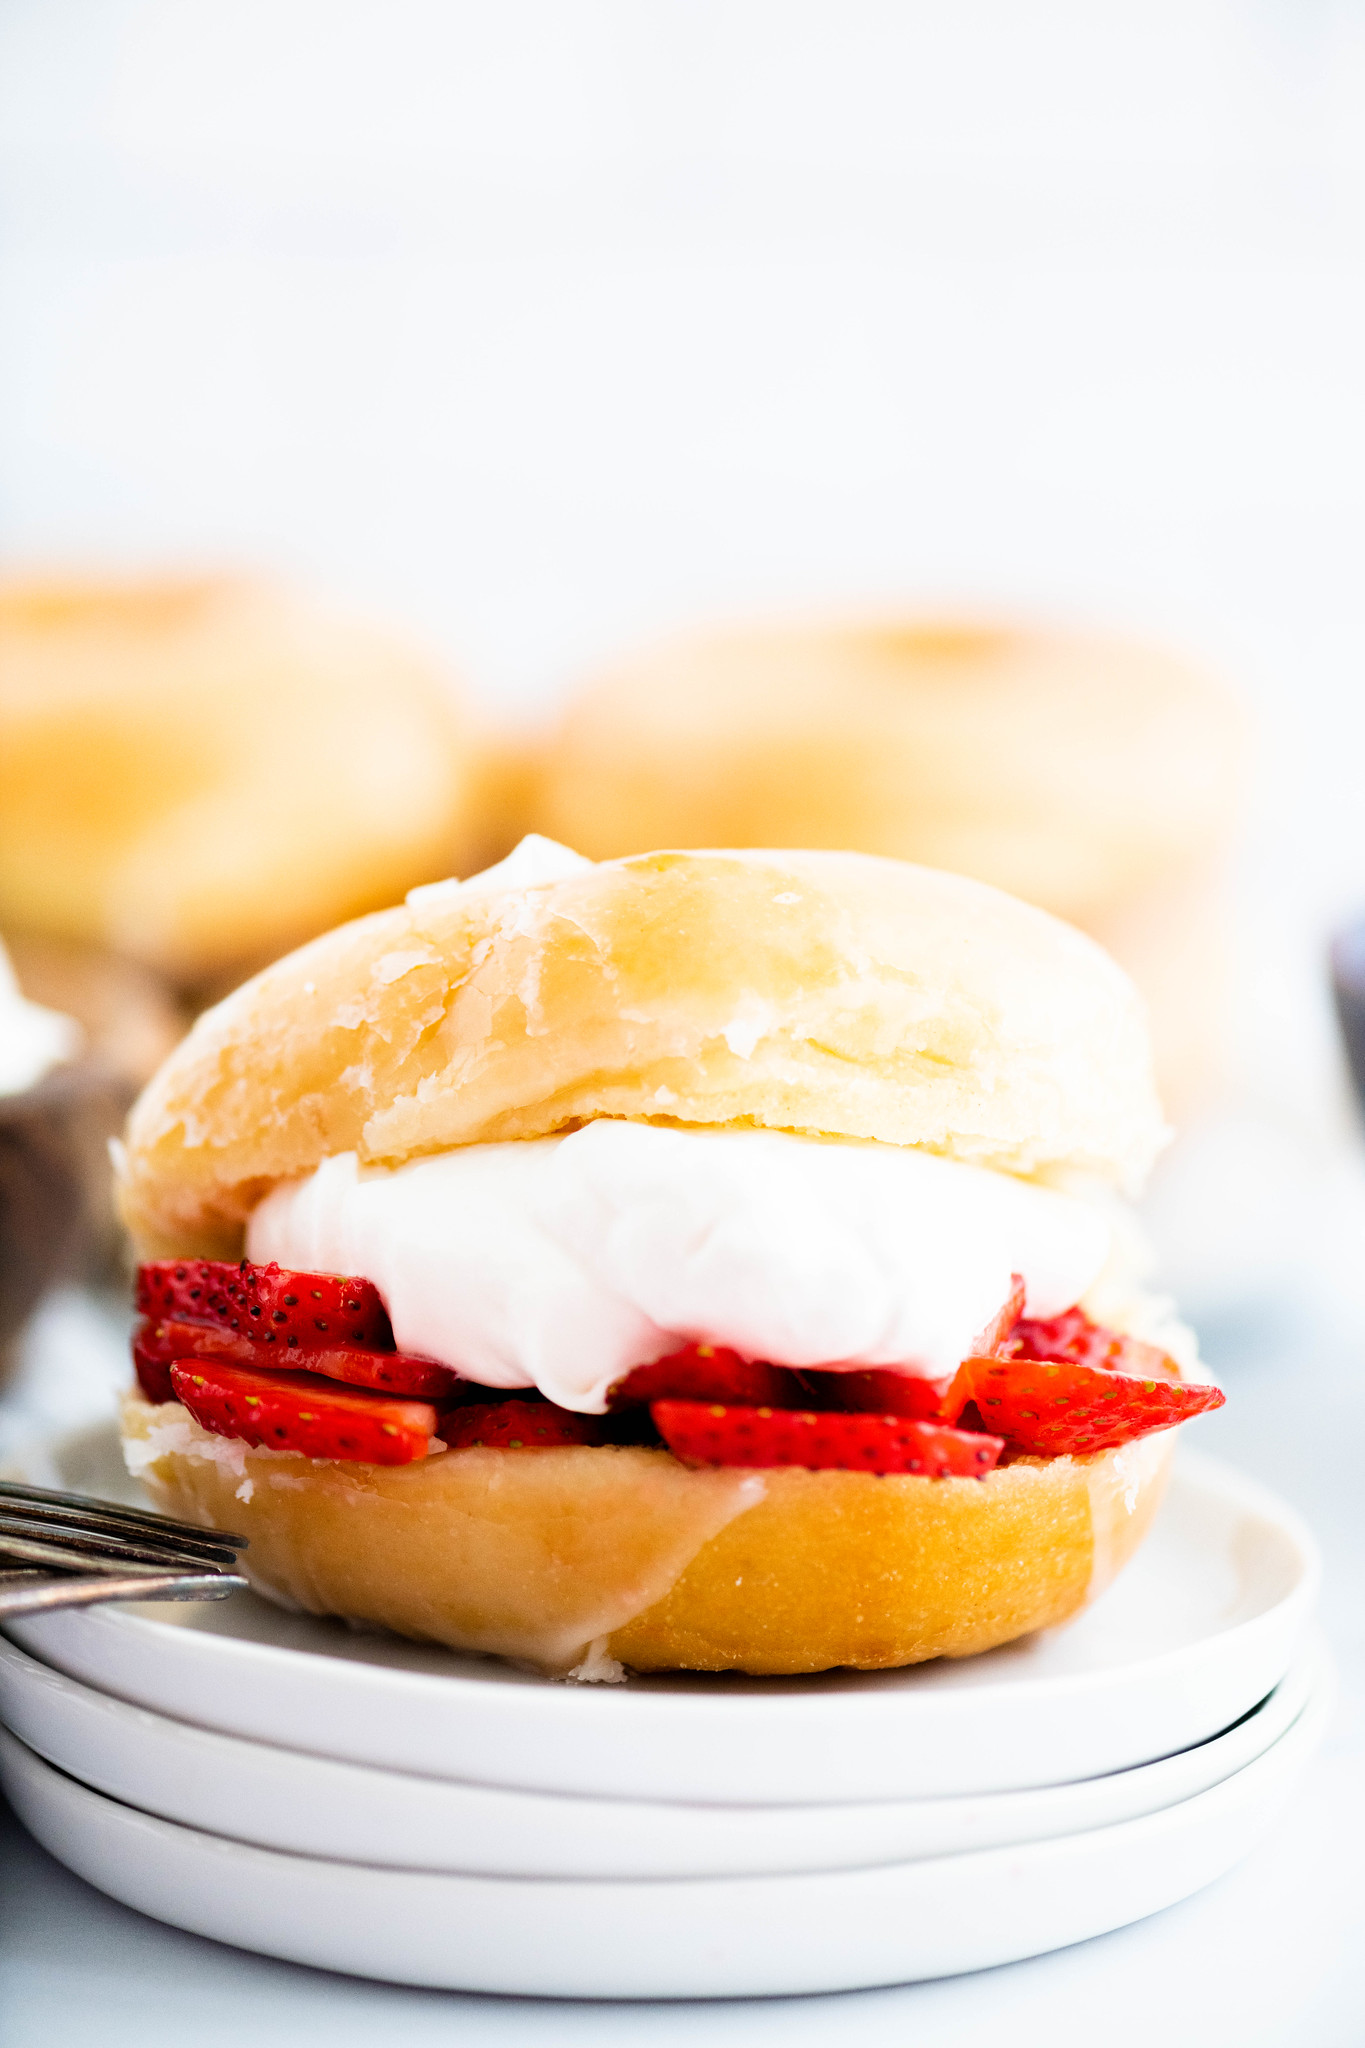 Close up of glazed donut filled with sliced, macerated strawberries and fresh whipped cream.